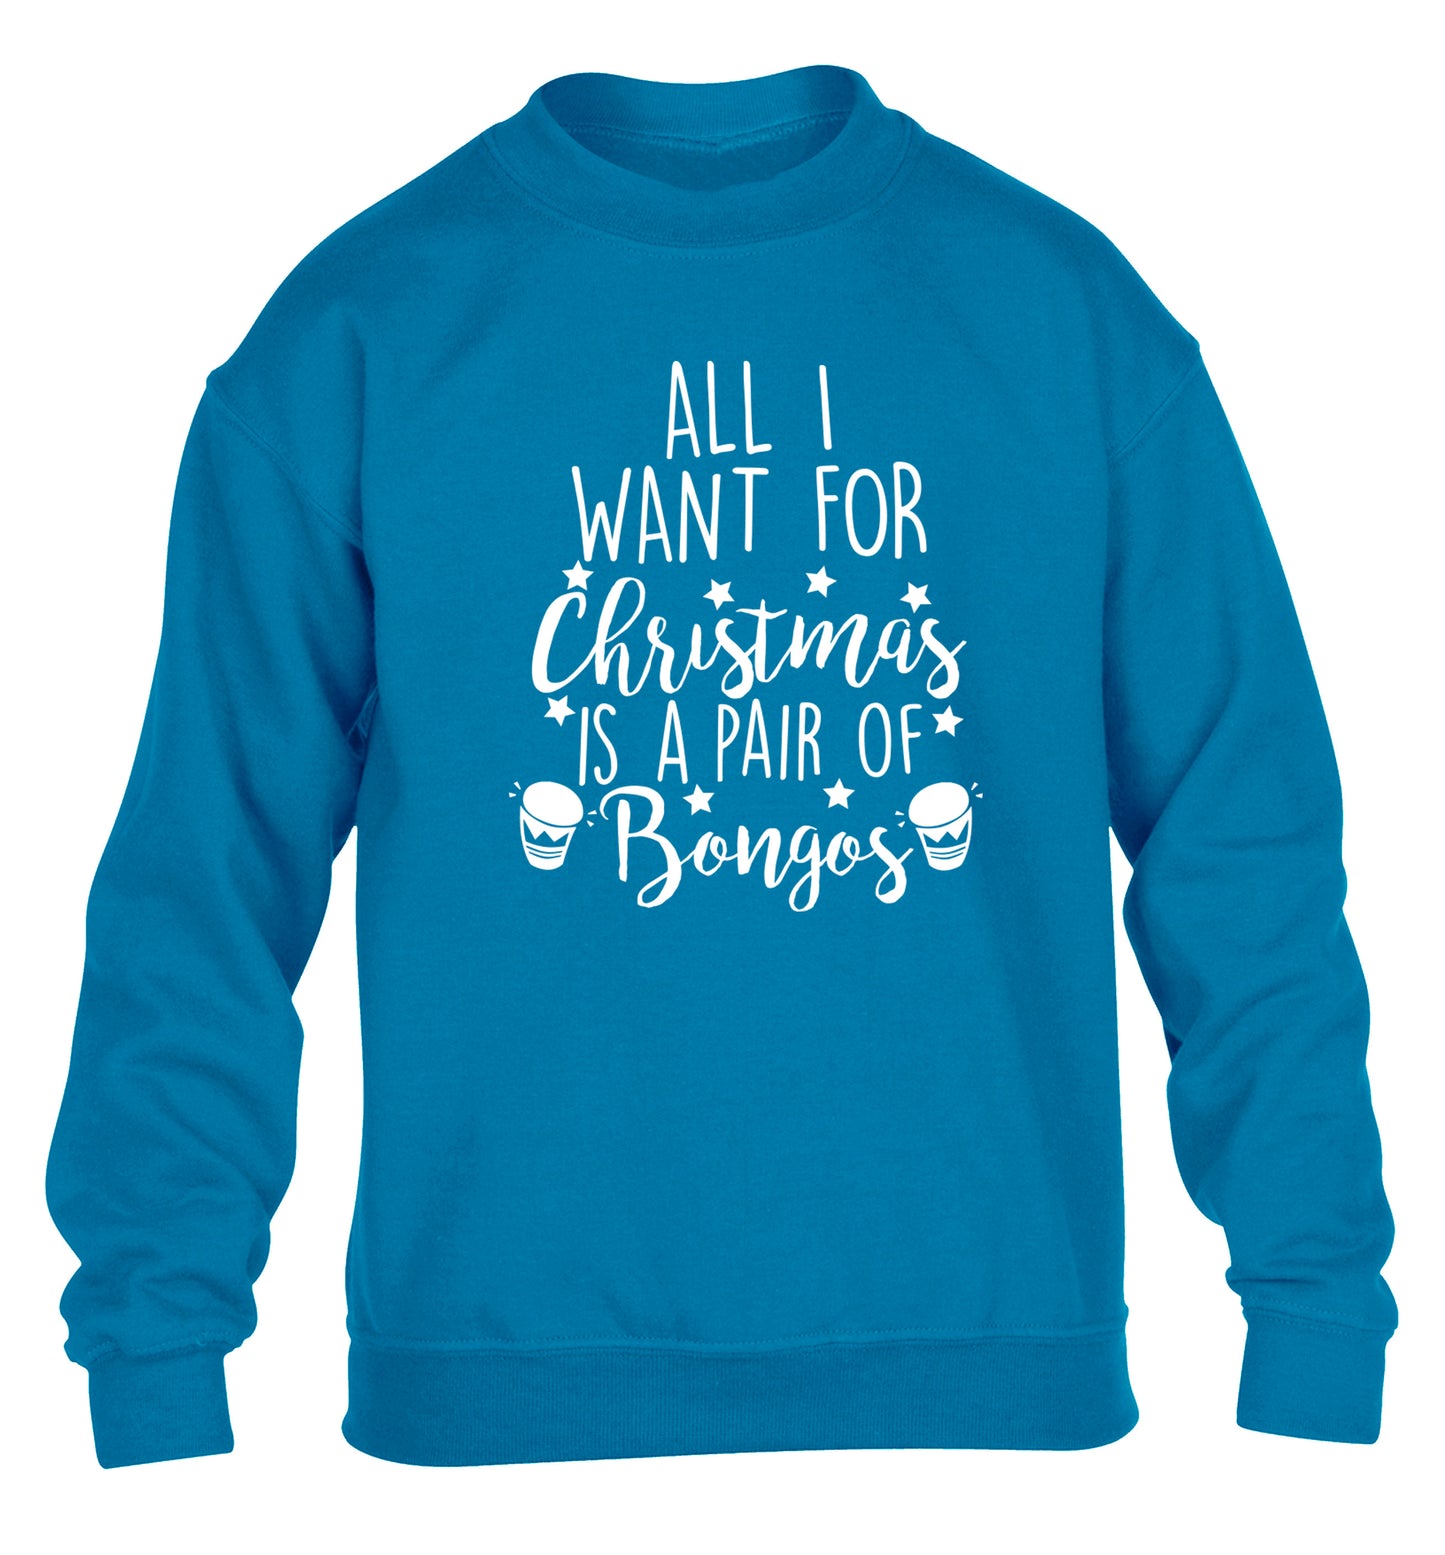 All I want for Christmas is a pair of bongos! children's blue sweater 12-14 Years